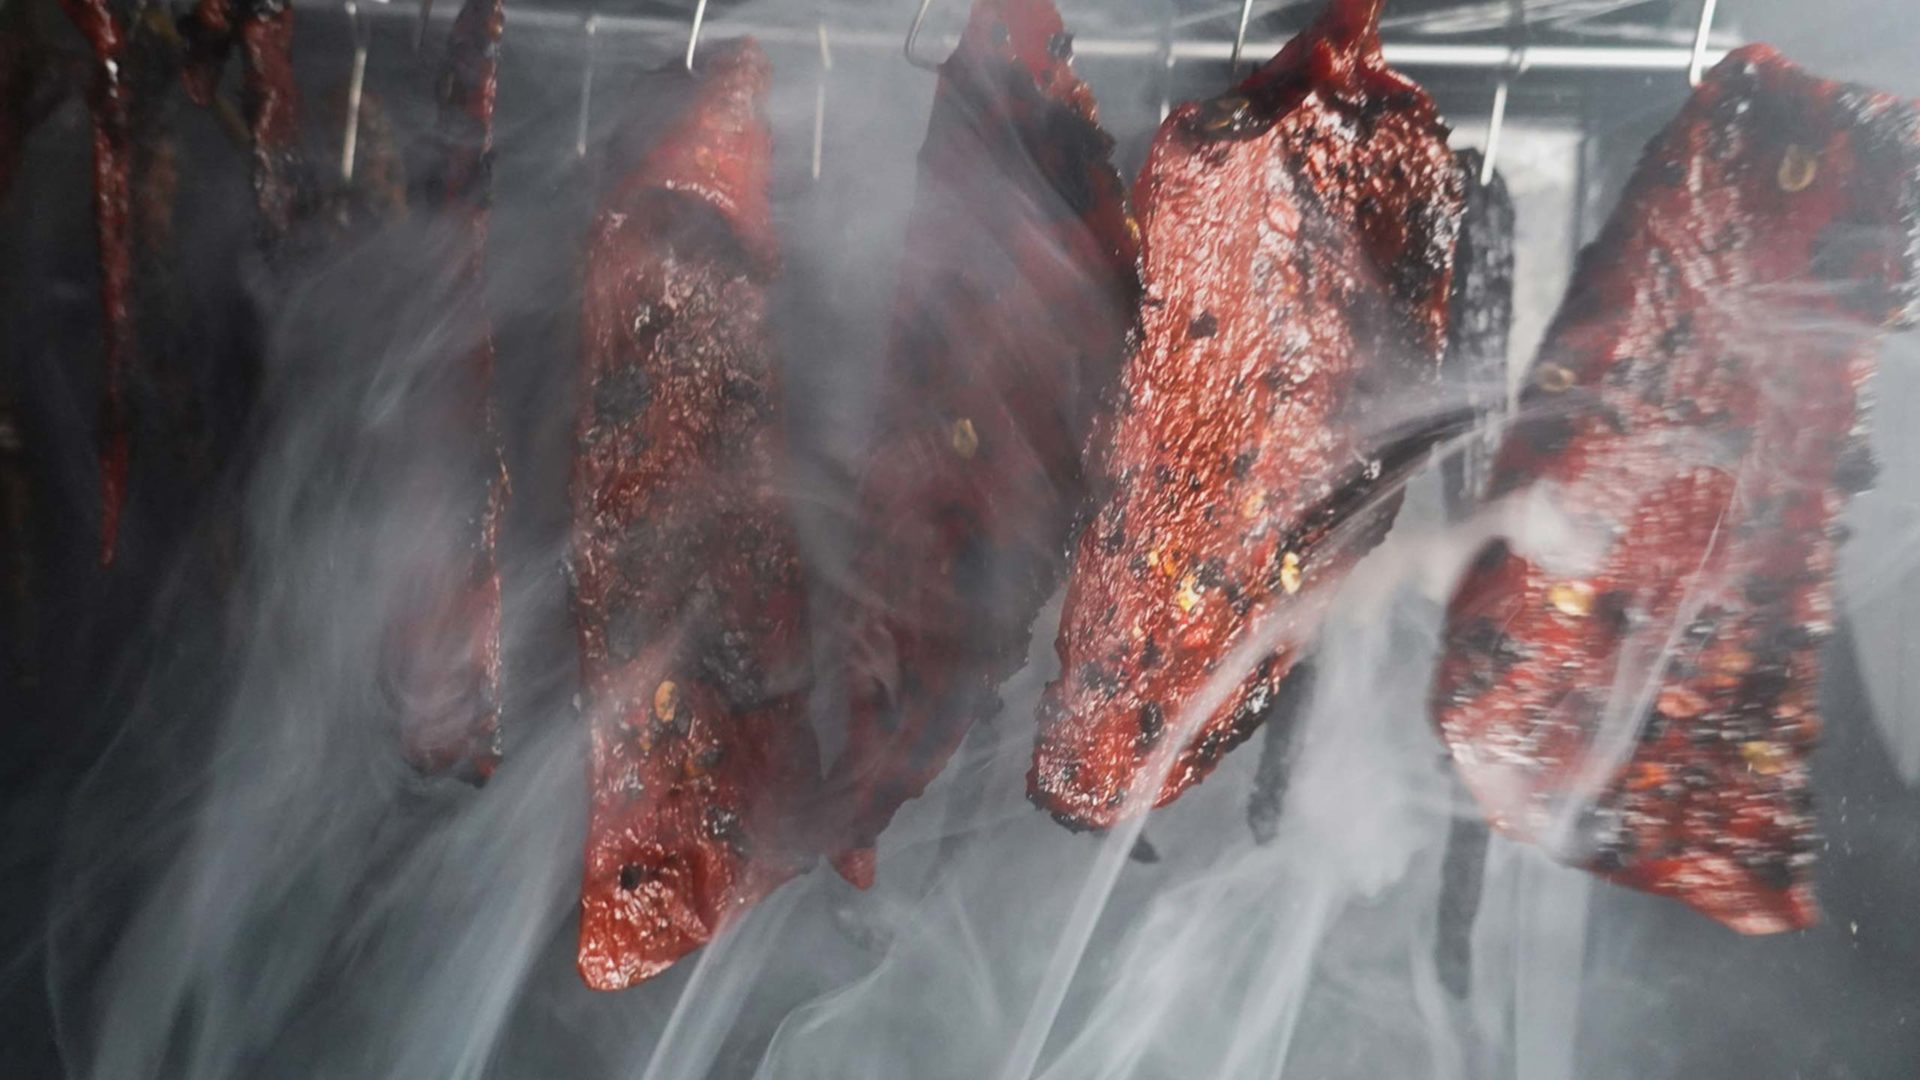 Watermelon jerky that is smoked